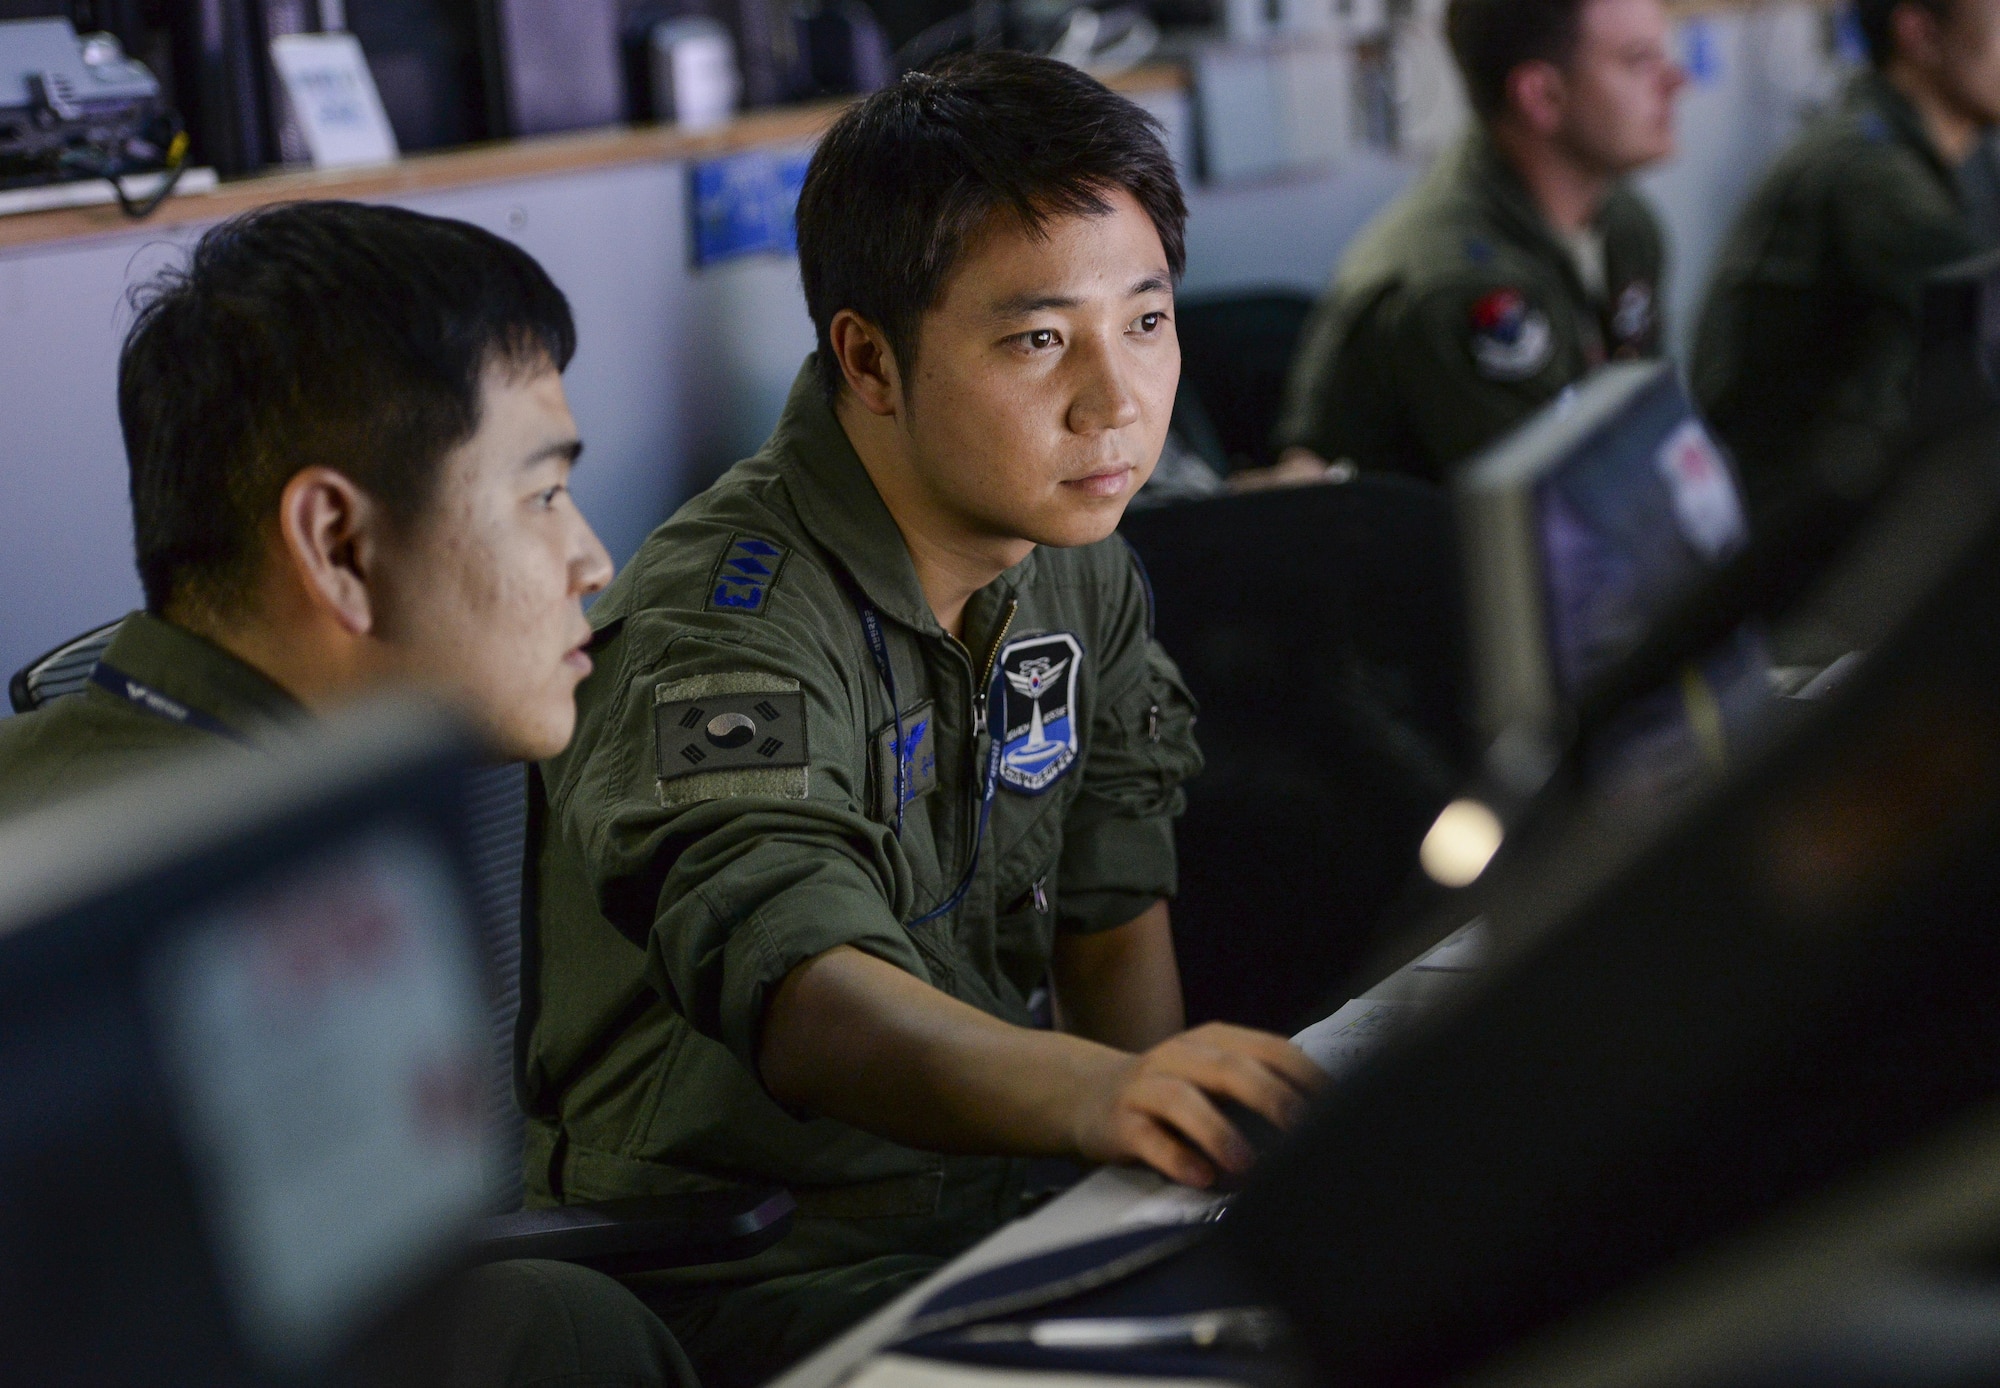 Republic of Korea Air Force Capt. Won Jung Seung, 6th Rescue Group pilot, monitors ROK air space at the Hardened Theater Air Control Center, Osan Air Base, ROK, during the first day of Ulchi Freedom Guardian, Aug. 17, 2015. Part of Won’s responsibility is to receive and relay vital information to commanders in order to support air rescue operations. UFG is an annual exercise that brings together U.S., ROK and other allied forces in an effort to ensure readiness to defend the ROK and help maintain stability on the Korean Peninsula. (U.S. Air Force photo by Airman 1st Class John Linzmeier/Released)